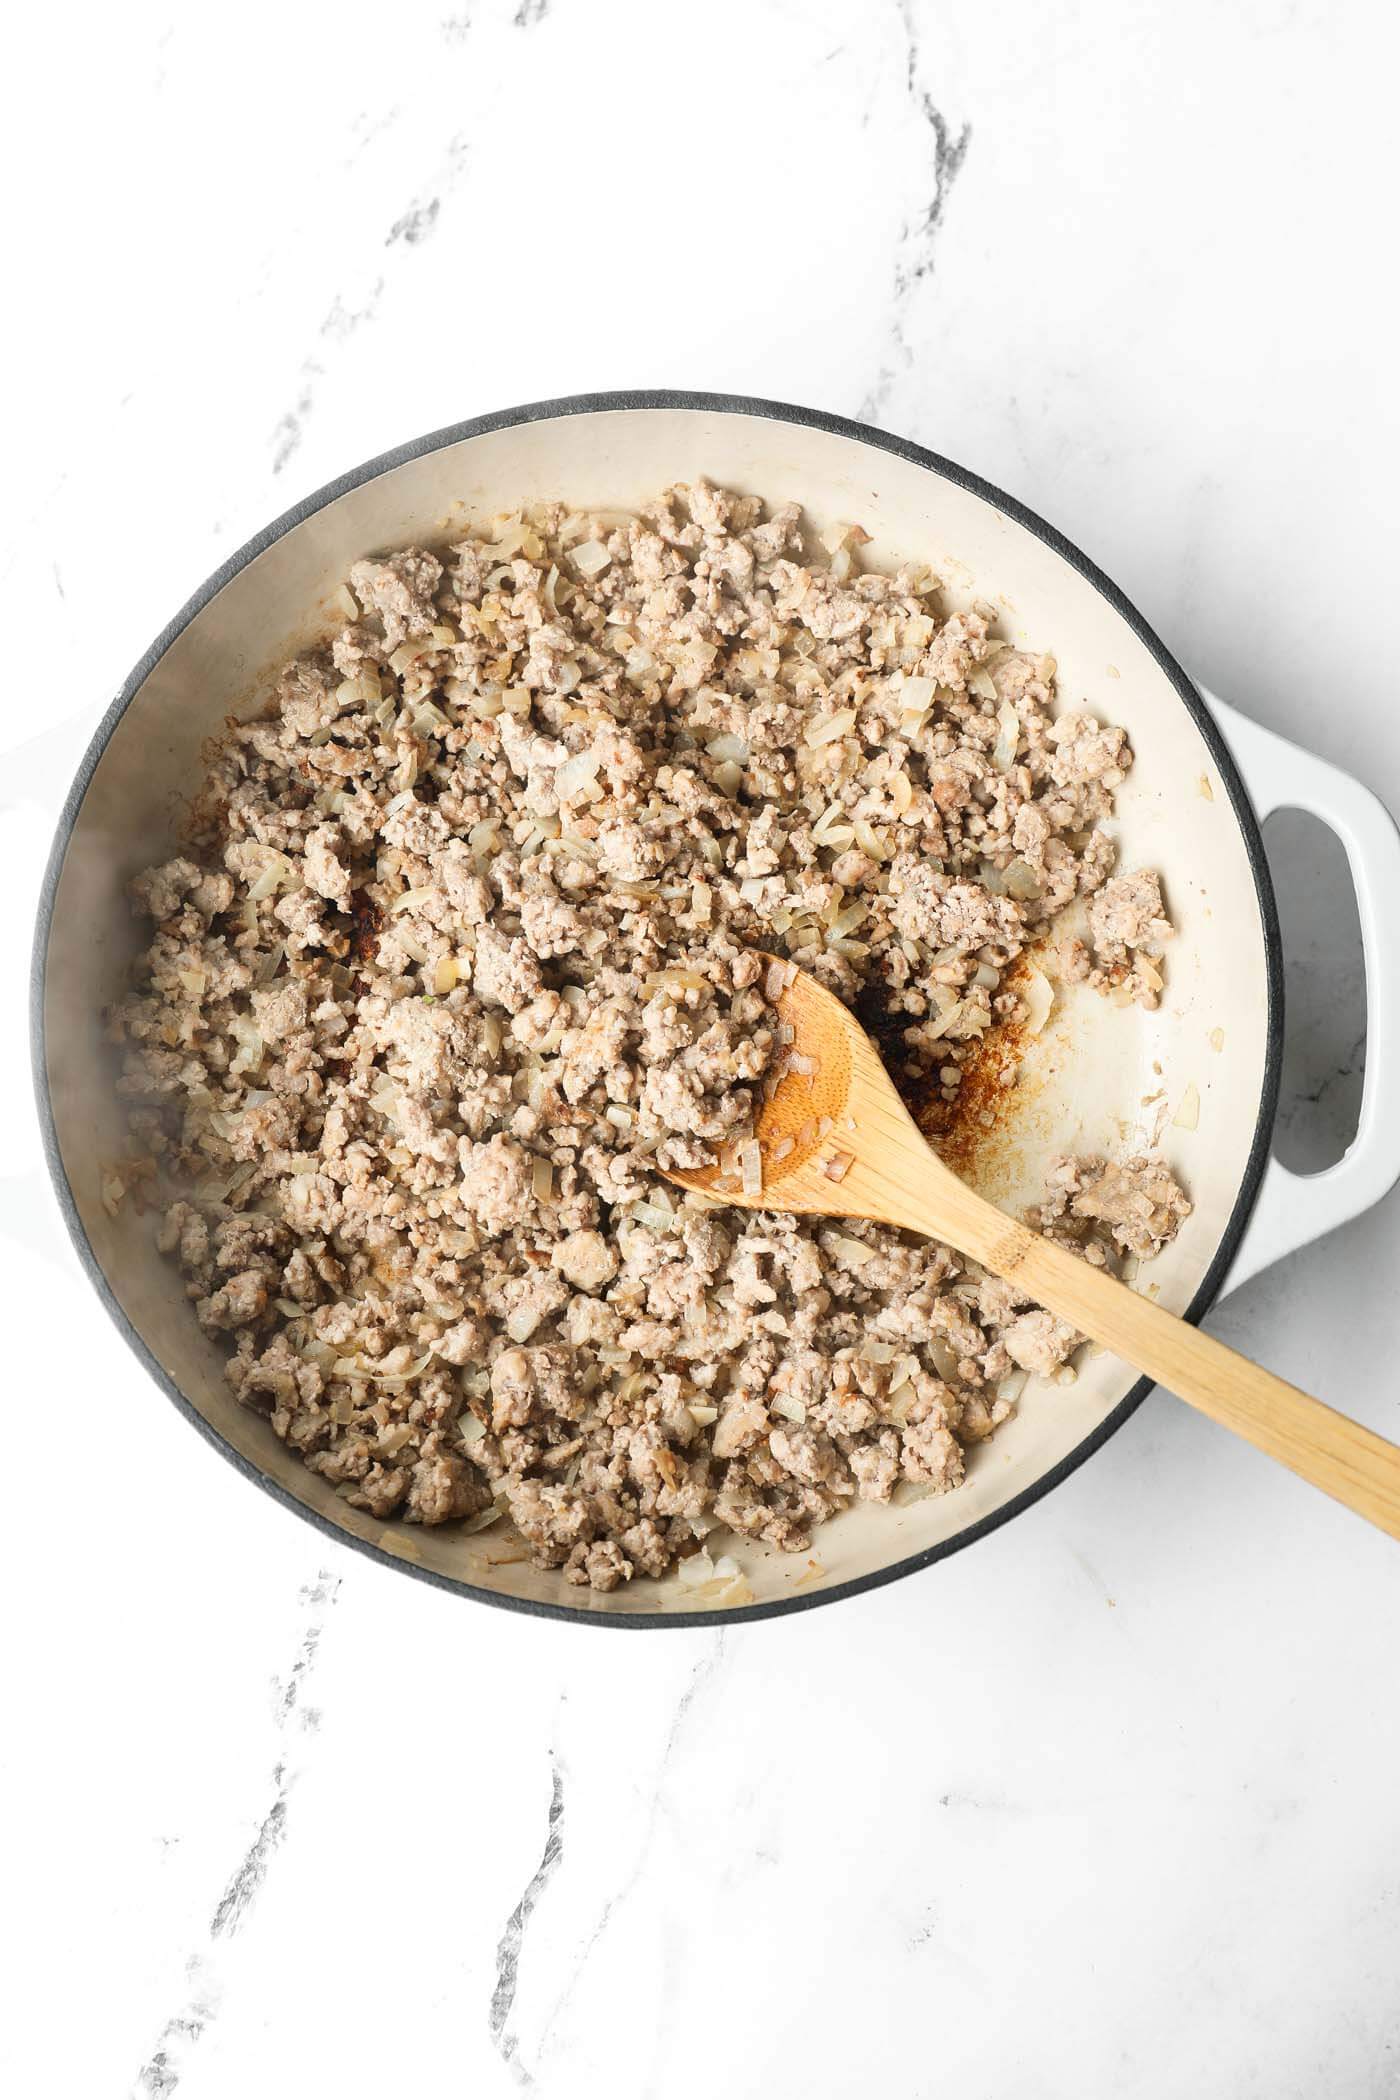 Overhead image of a skillet with ground pork browned in it. A wooden spoon is mixing it around.